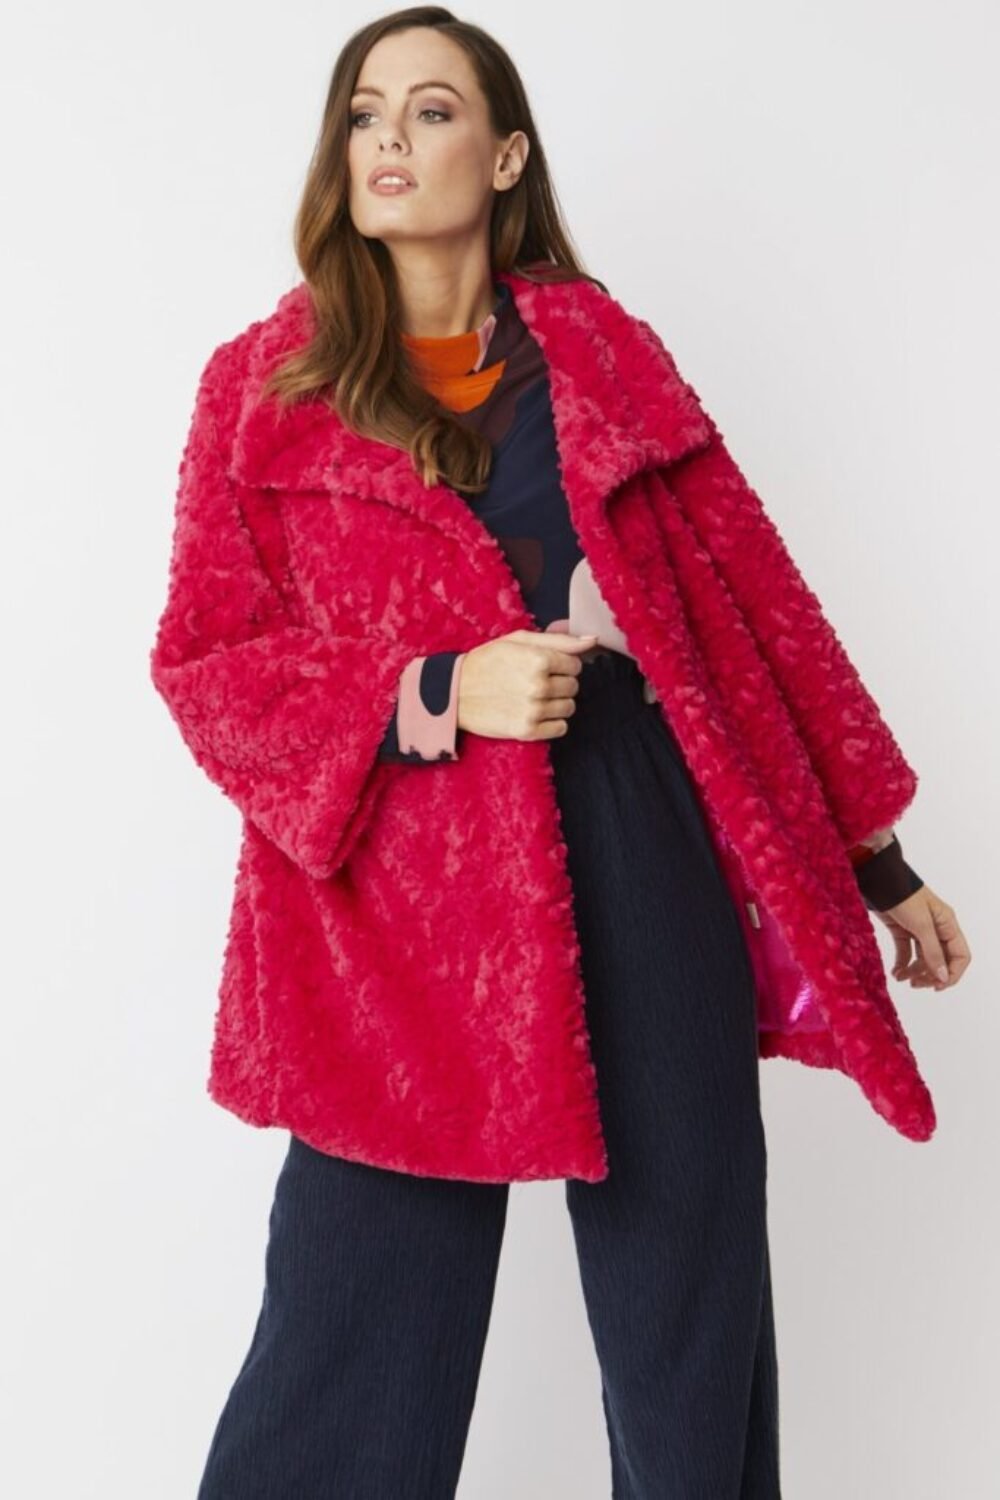 Shop Lux Pink Faux Fur Teddy Coat and women's luxury and designer clothes at www.lux-apparel.co.uk